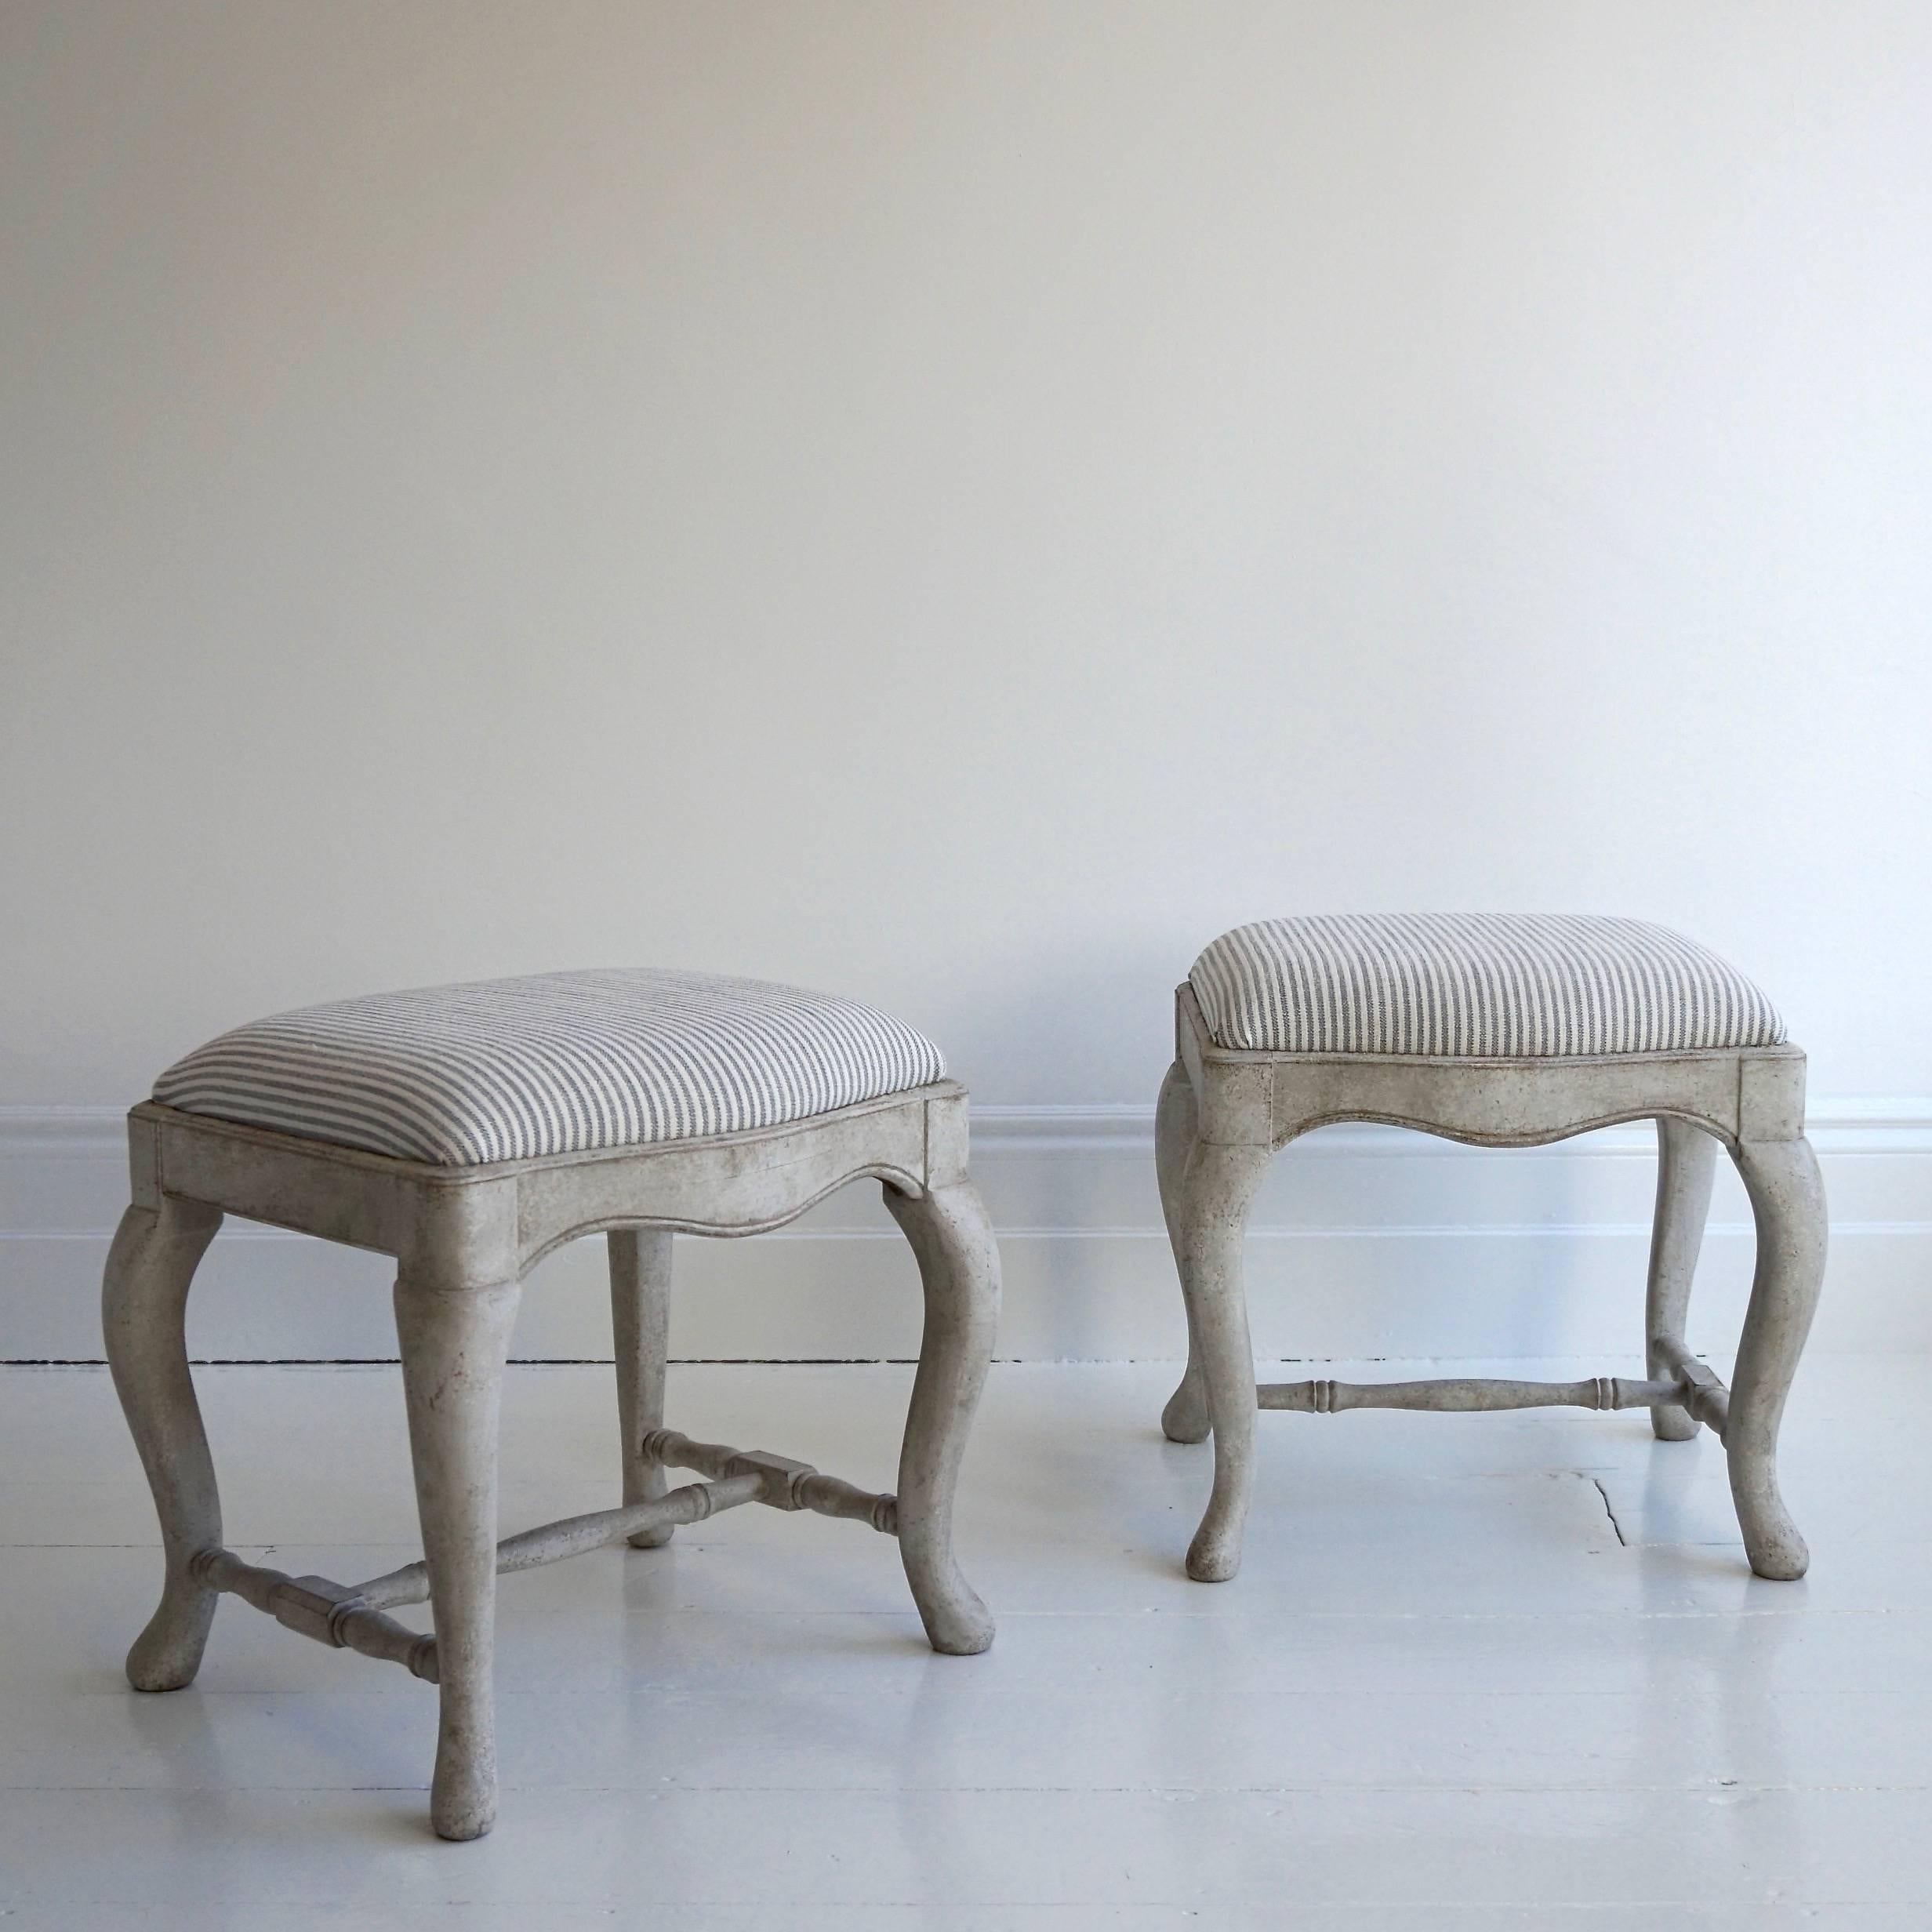 A wonderful pair of bespoke hand-carved Swedish Baroque style tabouret stools upholstered in designers Guild grey ticking.

These beautiful stools are historically accurate, hand-carved renditions of original 1750s Swedish Baroque stools. Our